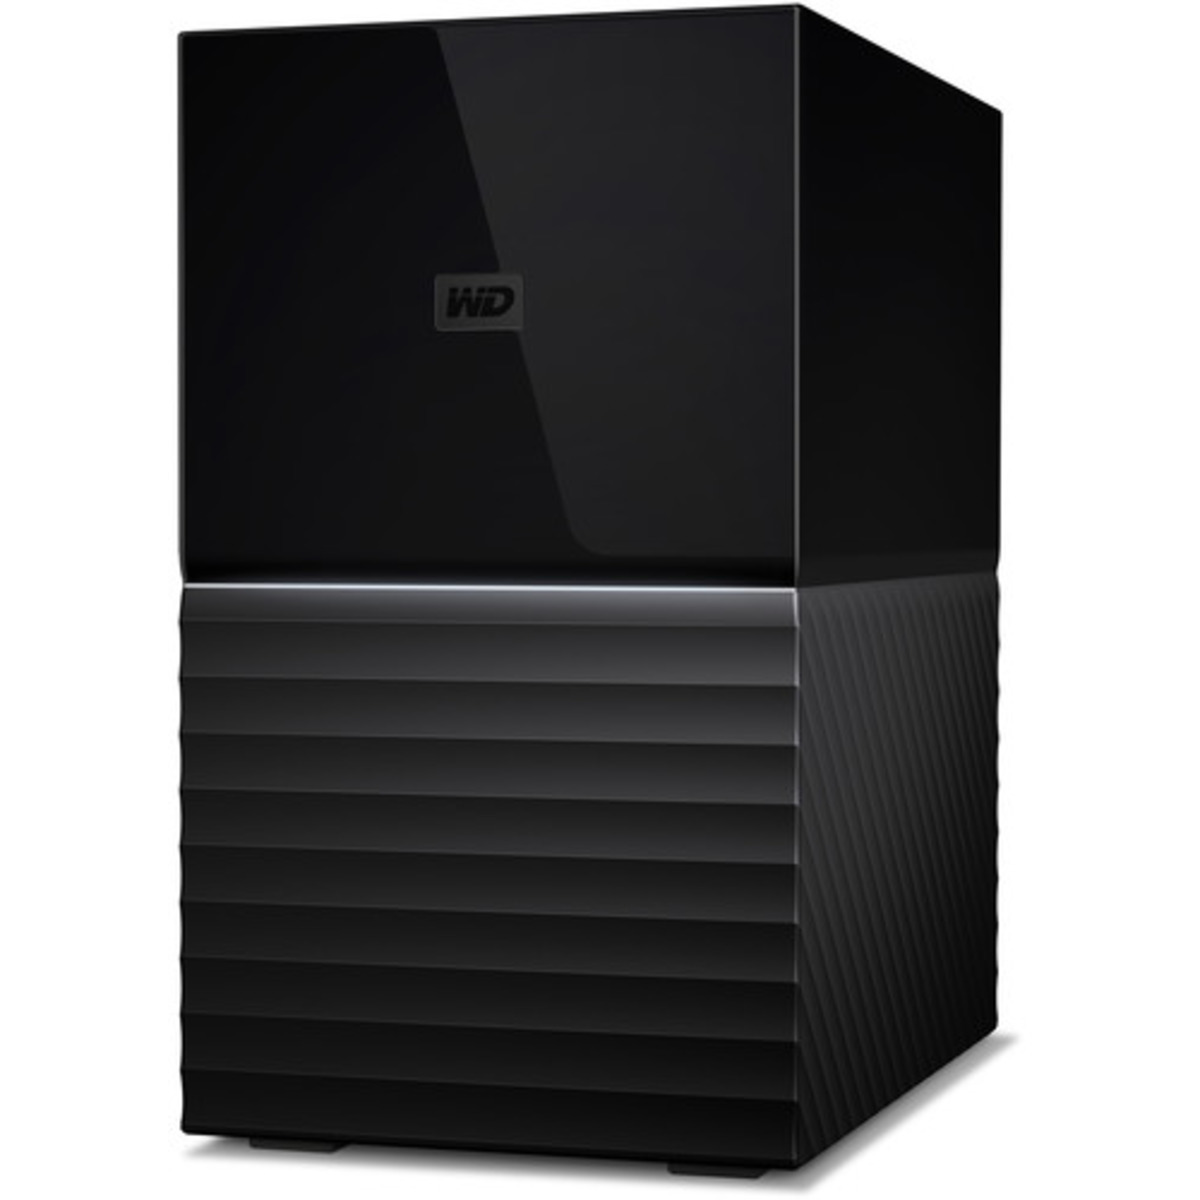 buy $1114 Western Digital My Book DUO Gen 2 20tb Desktop DAS - Direct Attached Storage Device 2x10000gb Western Digital Ultrastar DC HC510 HUH721010ALE600 3.5 7200rpm SATA 6Gb/s HDD ENTERPRISE Class Drives Installed - Burn-In Tested - ON SALE - nas headquarters buy network attached storage server device das new raid-5 free shipping usa christmas new year holiday sale My Book DUO Gen 2